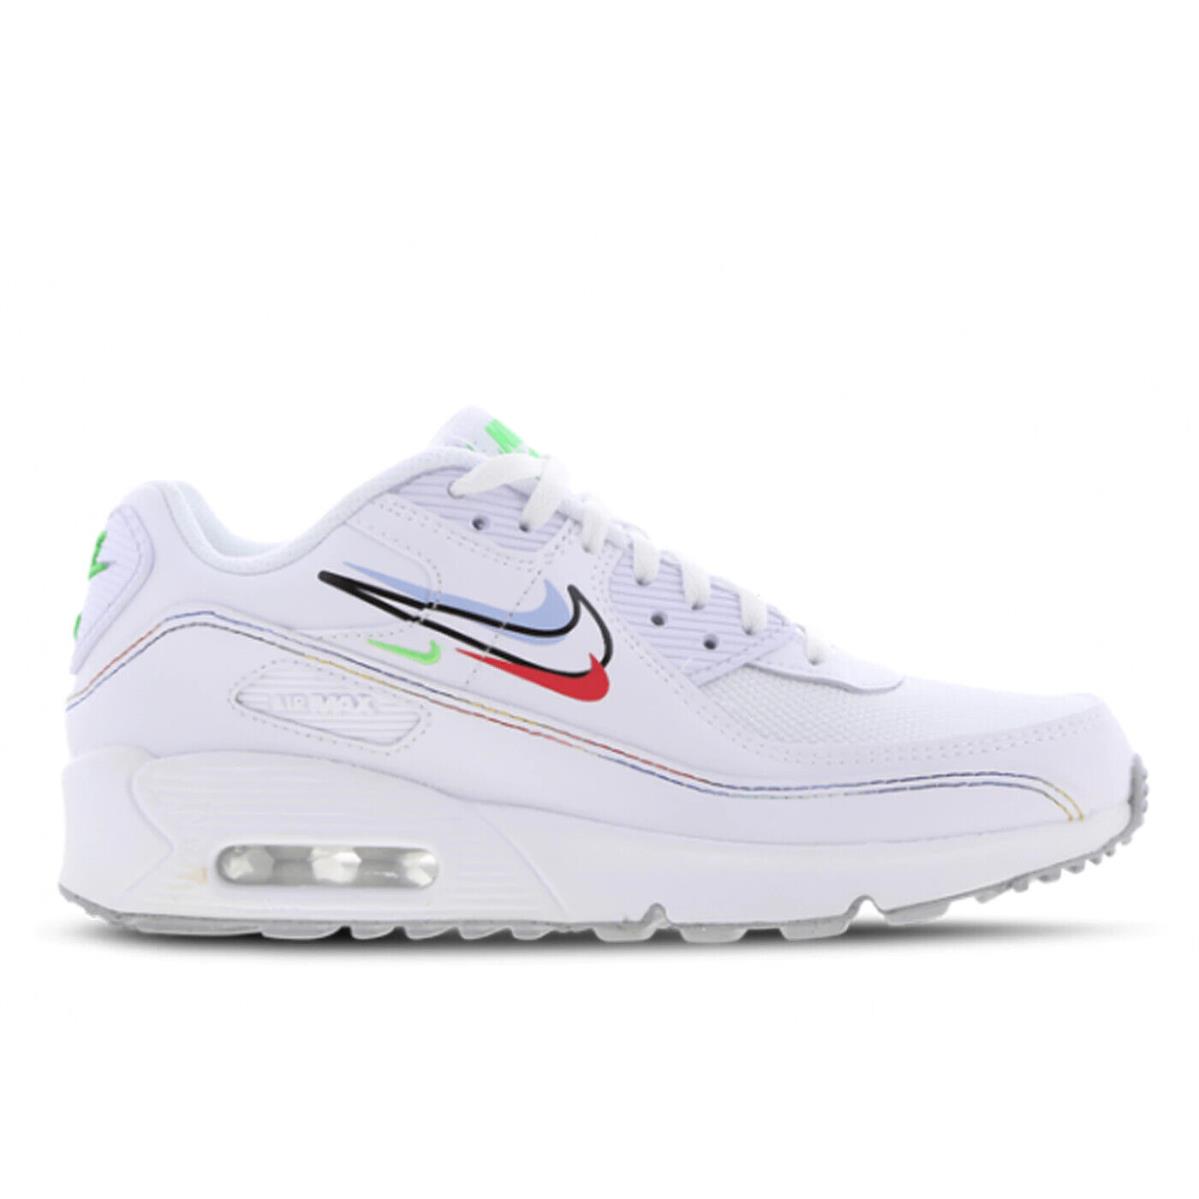 Nike Air Max 90 Youth Size 4.0 TO 6.0 White Green Spark Aluminum Comfortable